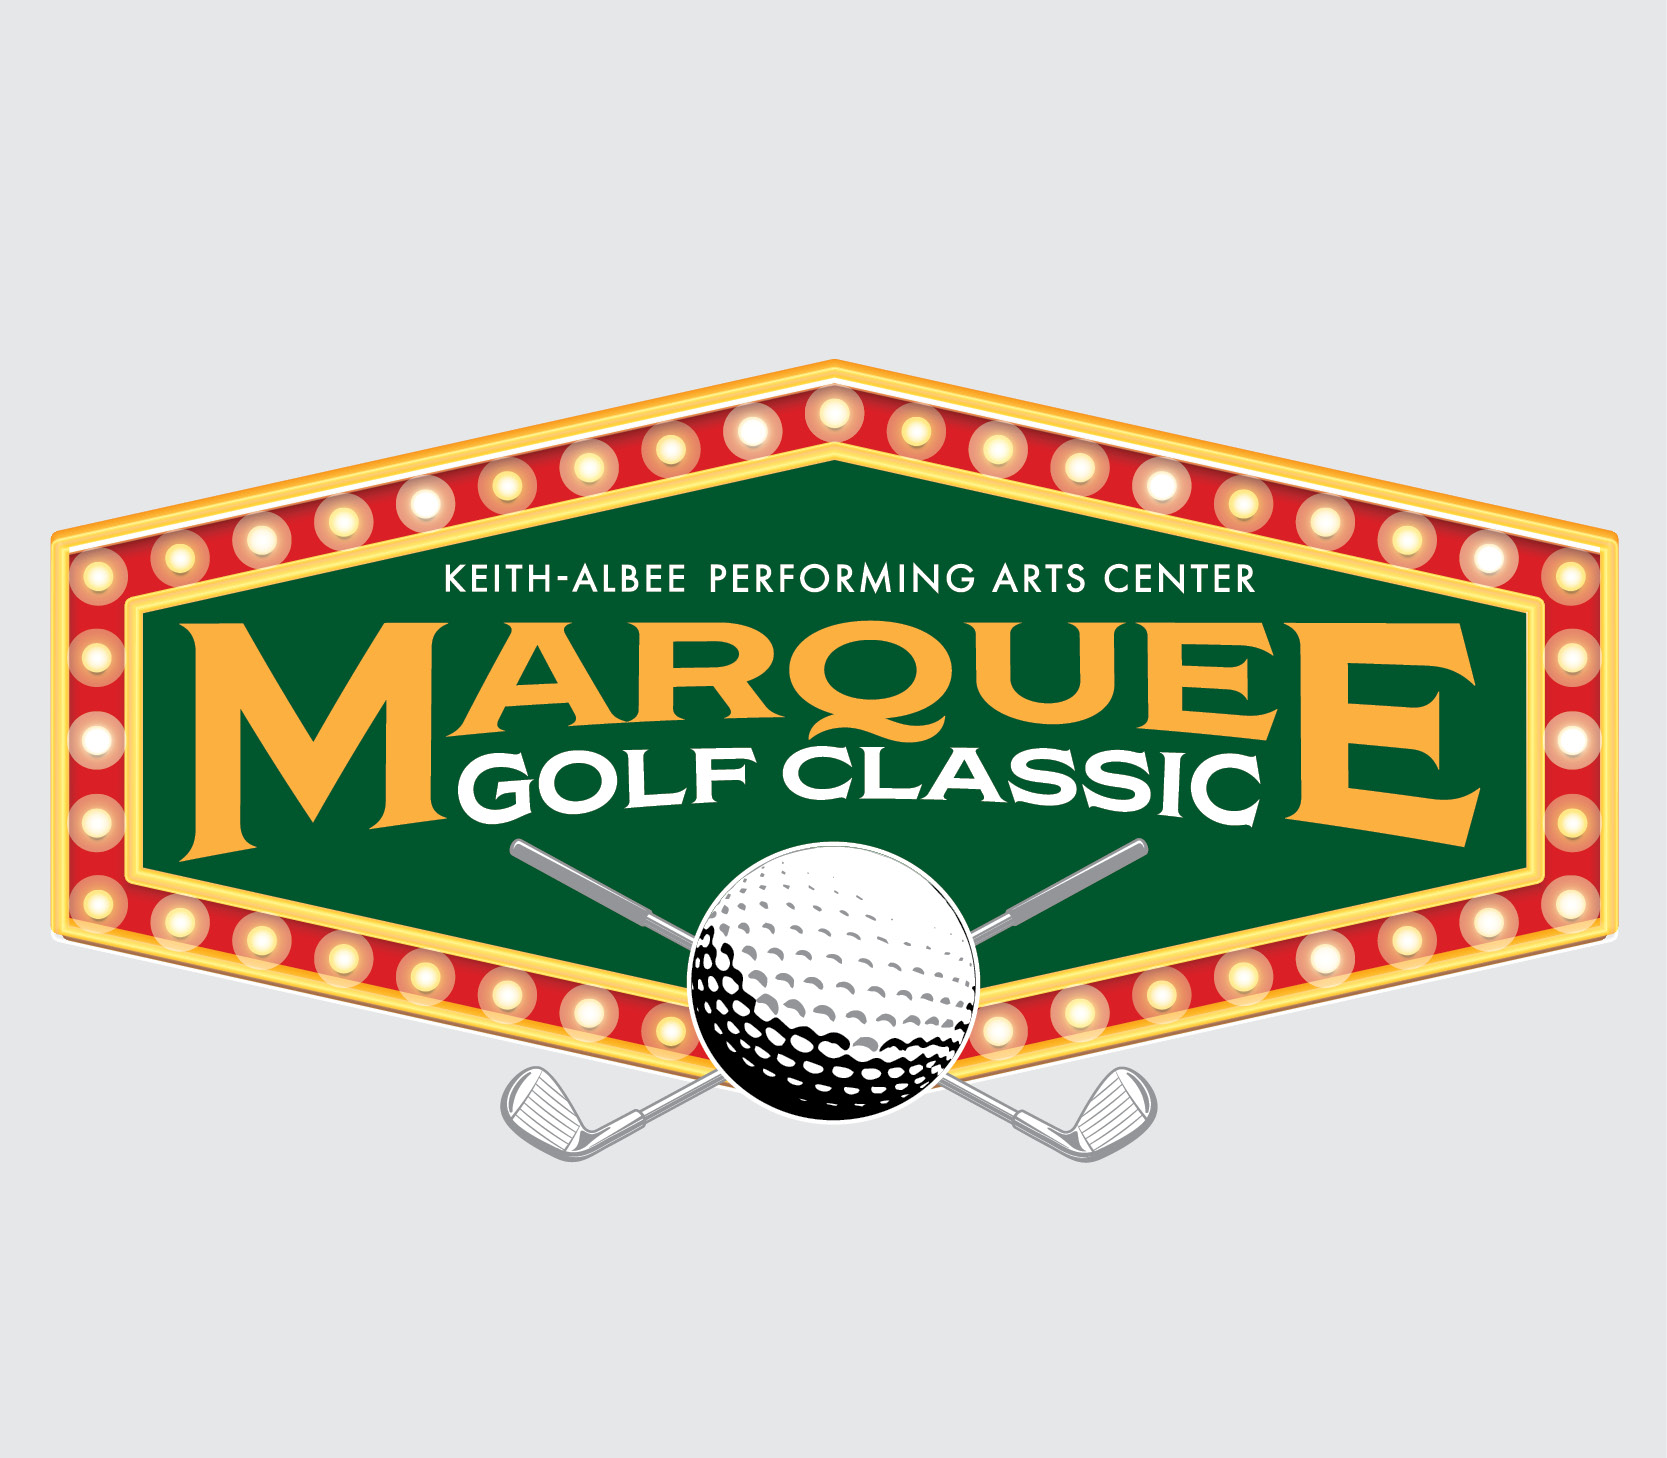 Marquee Golf Classic